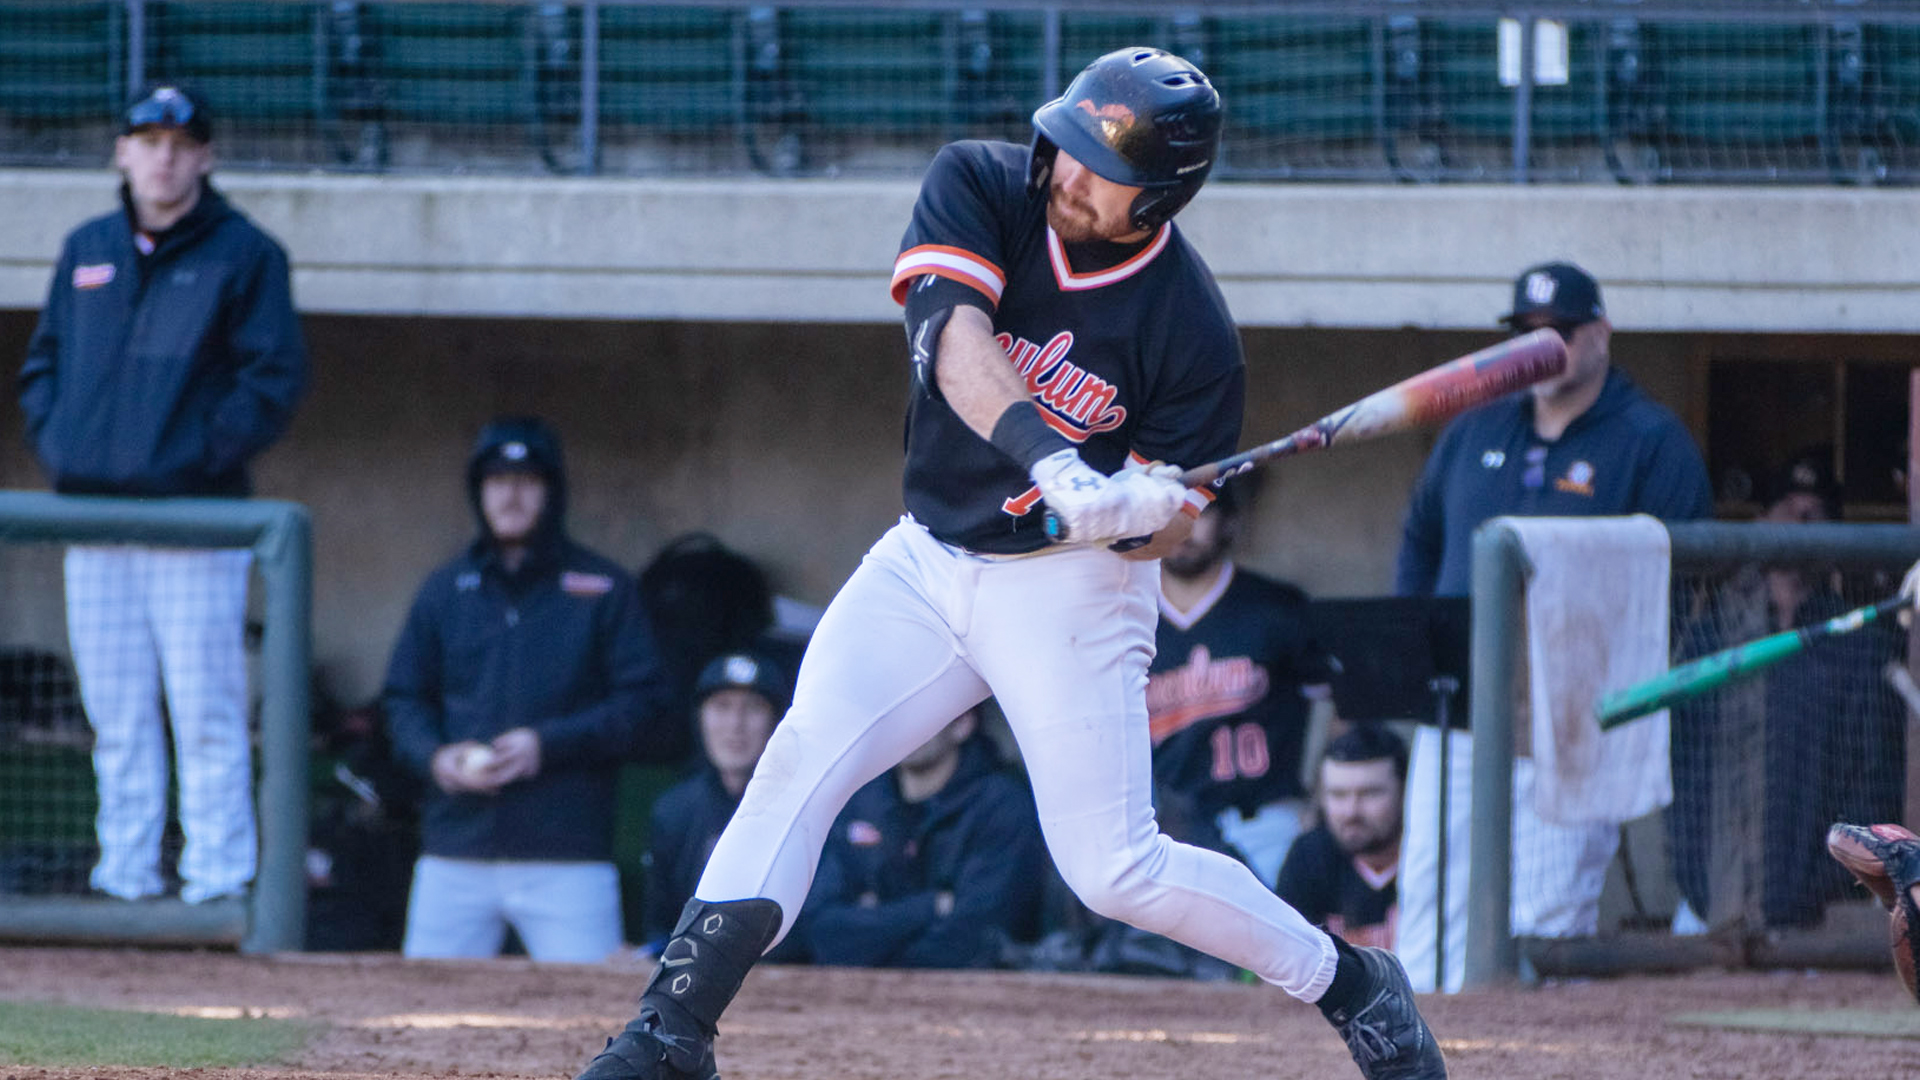 Pioneers overcome early deficit to down Wingate in series opener